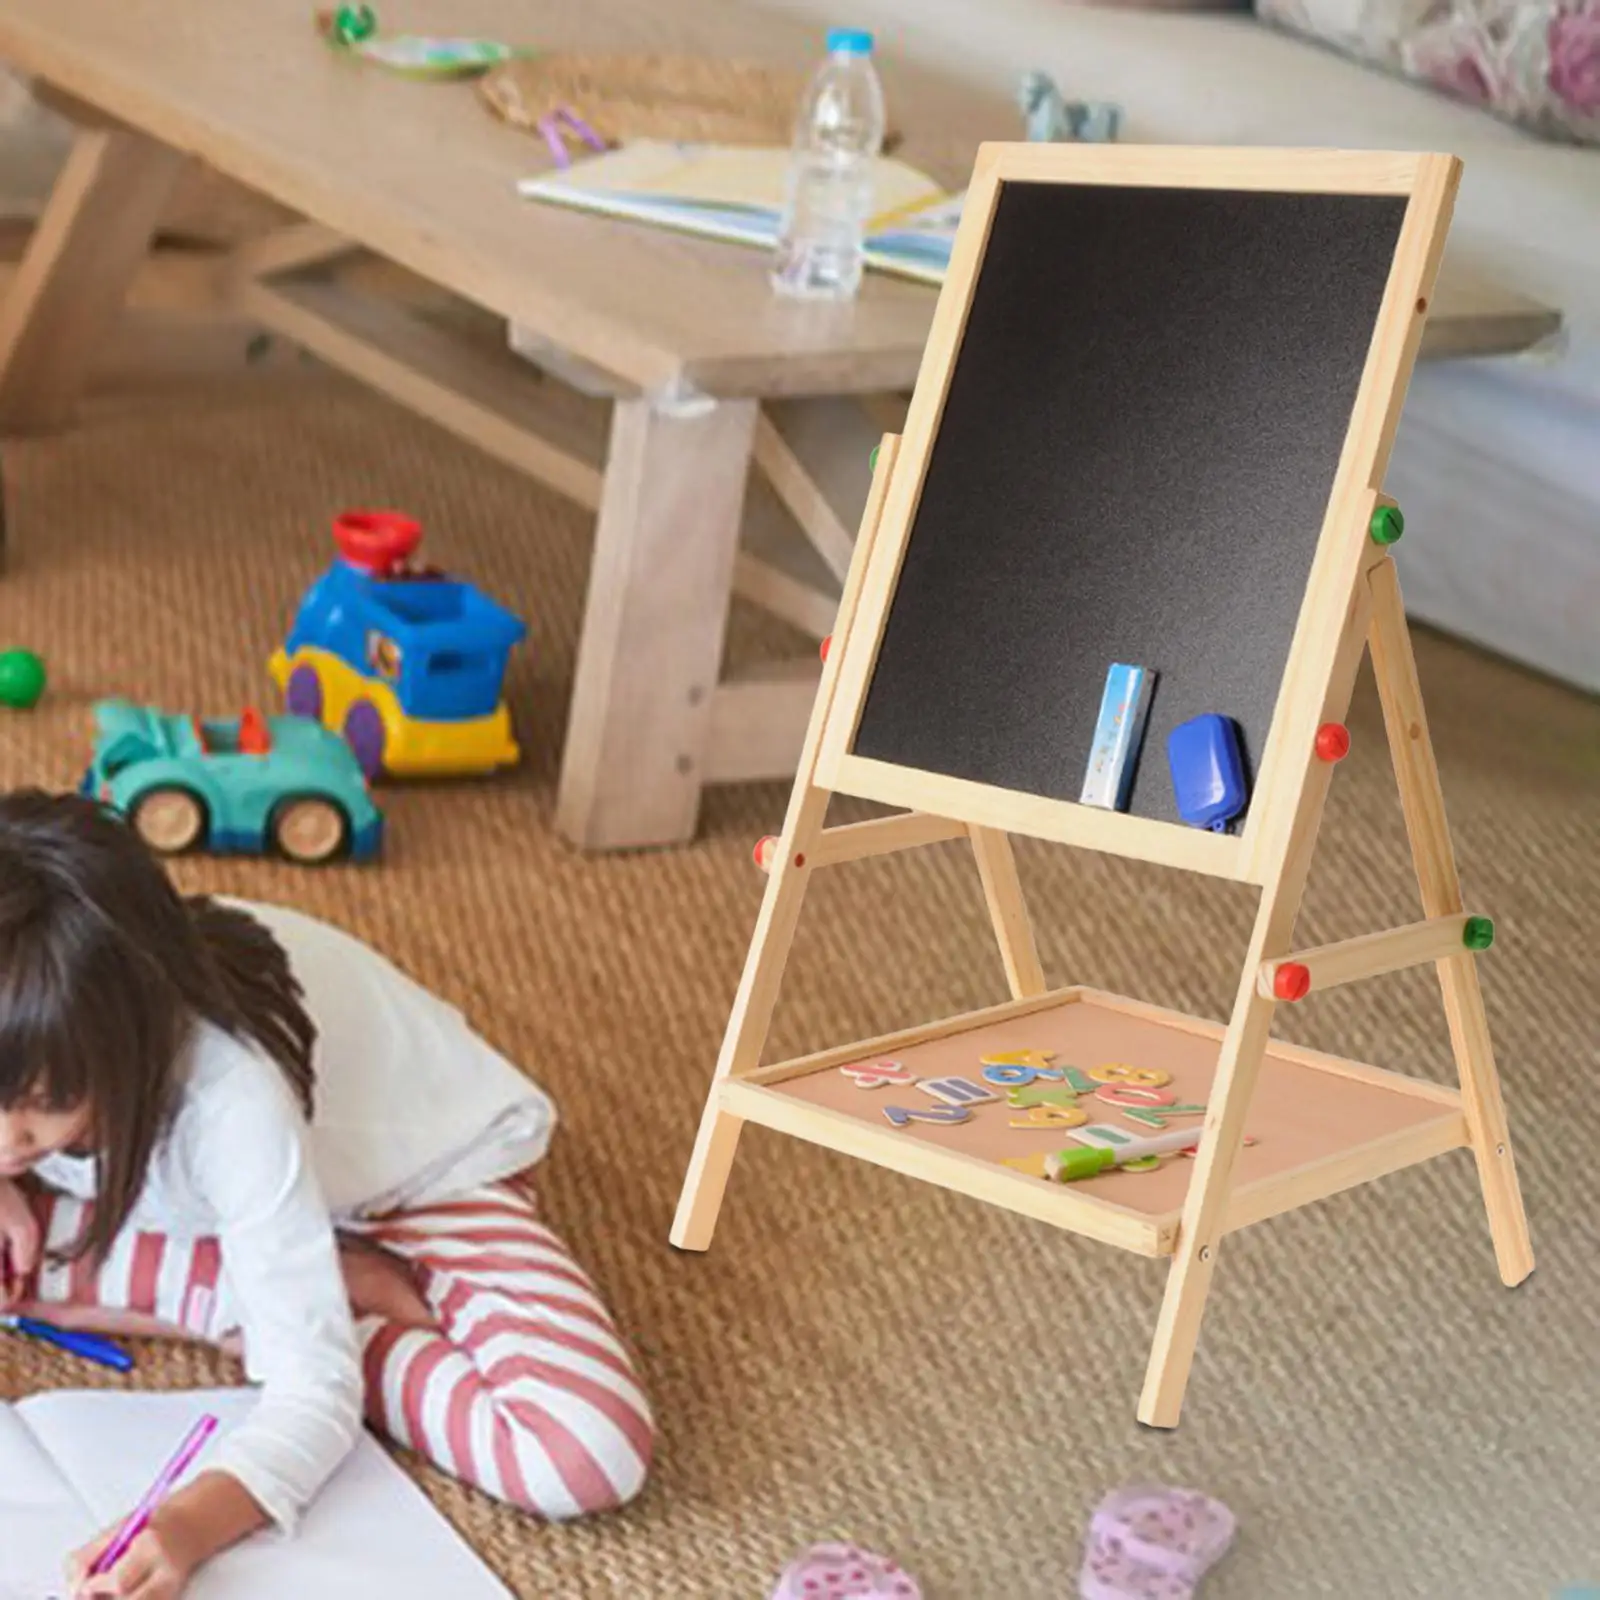 Kids Easel height Chalkboard Standing Drawing Easel Board erase Board Double Sided Drawing Easel for indoor